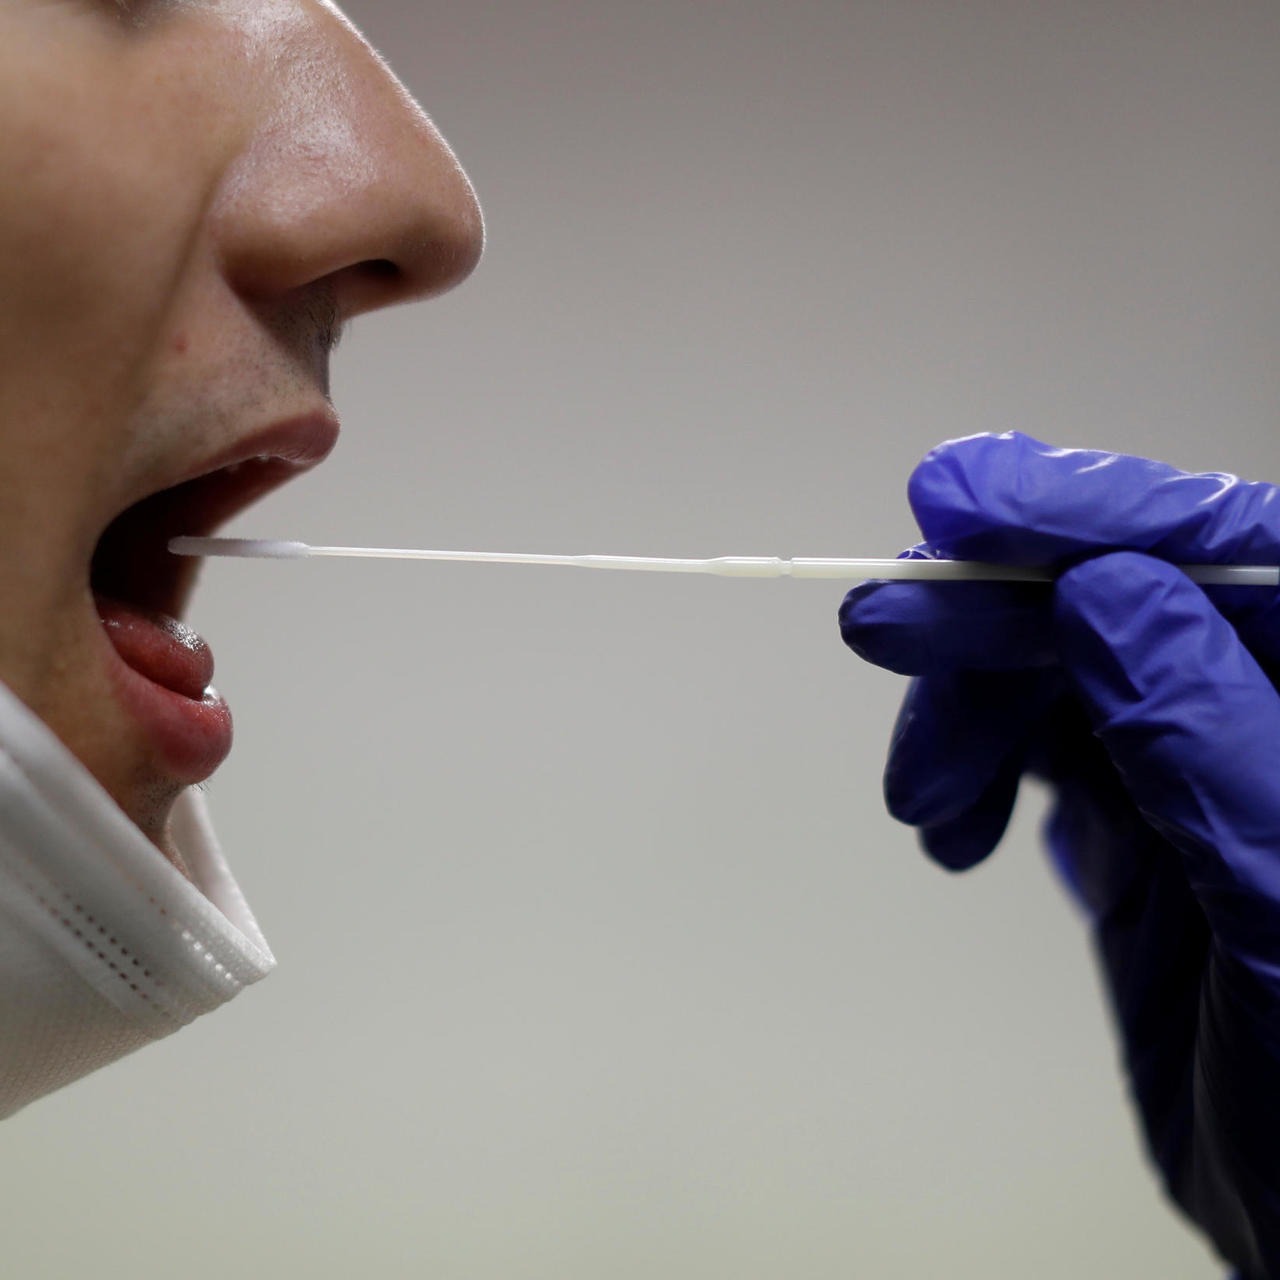 Abu Dhabi Public Health Center (ADPHC), the Department of Education and Knowledge (ADEK), and the Biogenics Laboratory have performed saliva testing for more than 2,000 children in Abu Dhabi schools. (WAM)